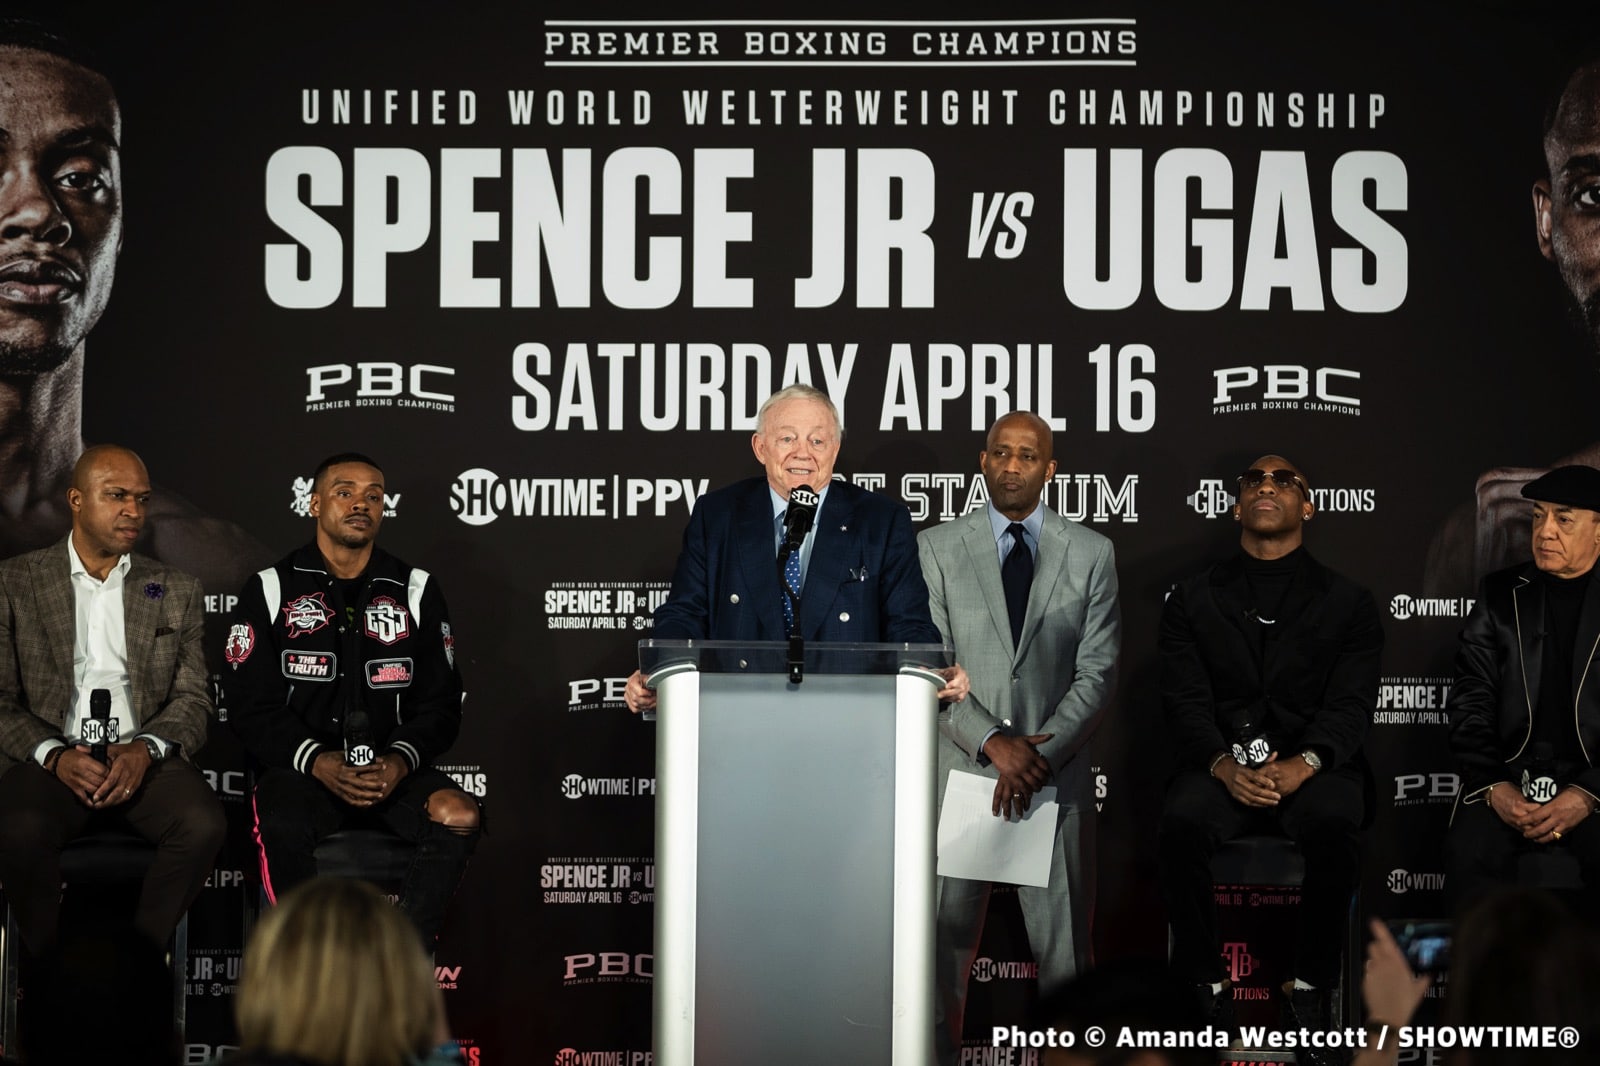 Shawn Porter believes Yordenis Ugas can beat Spence